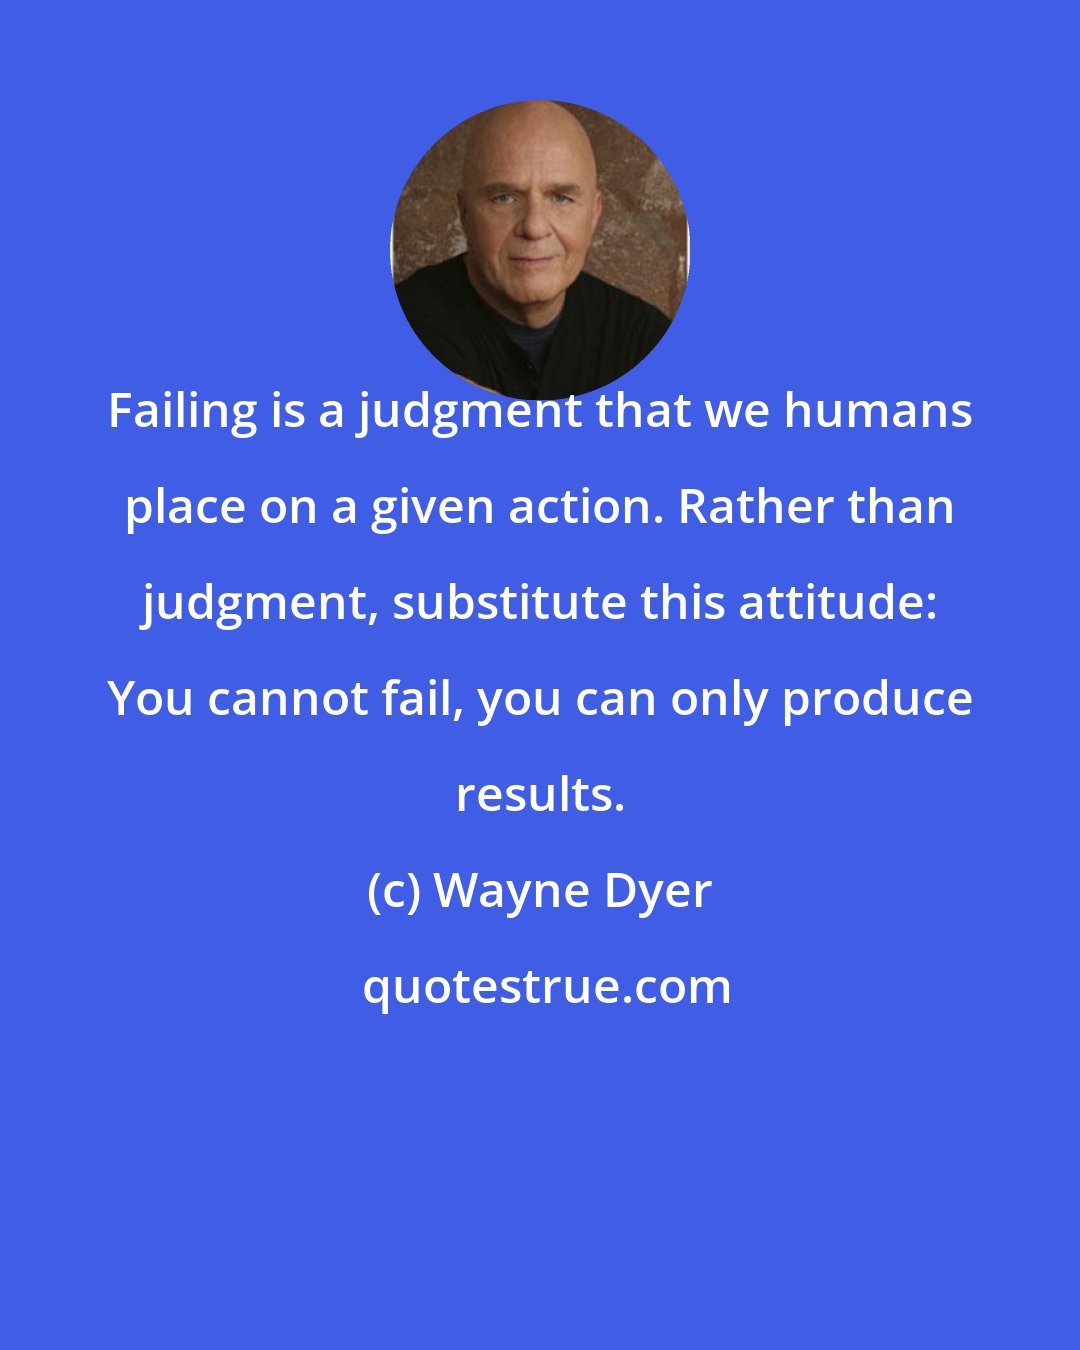 Wayne Dyer: Failing is a judgment that we humans place on a given action. Rather than judgment, substitute this attitude: You cannot fail, you can only produce results.